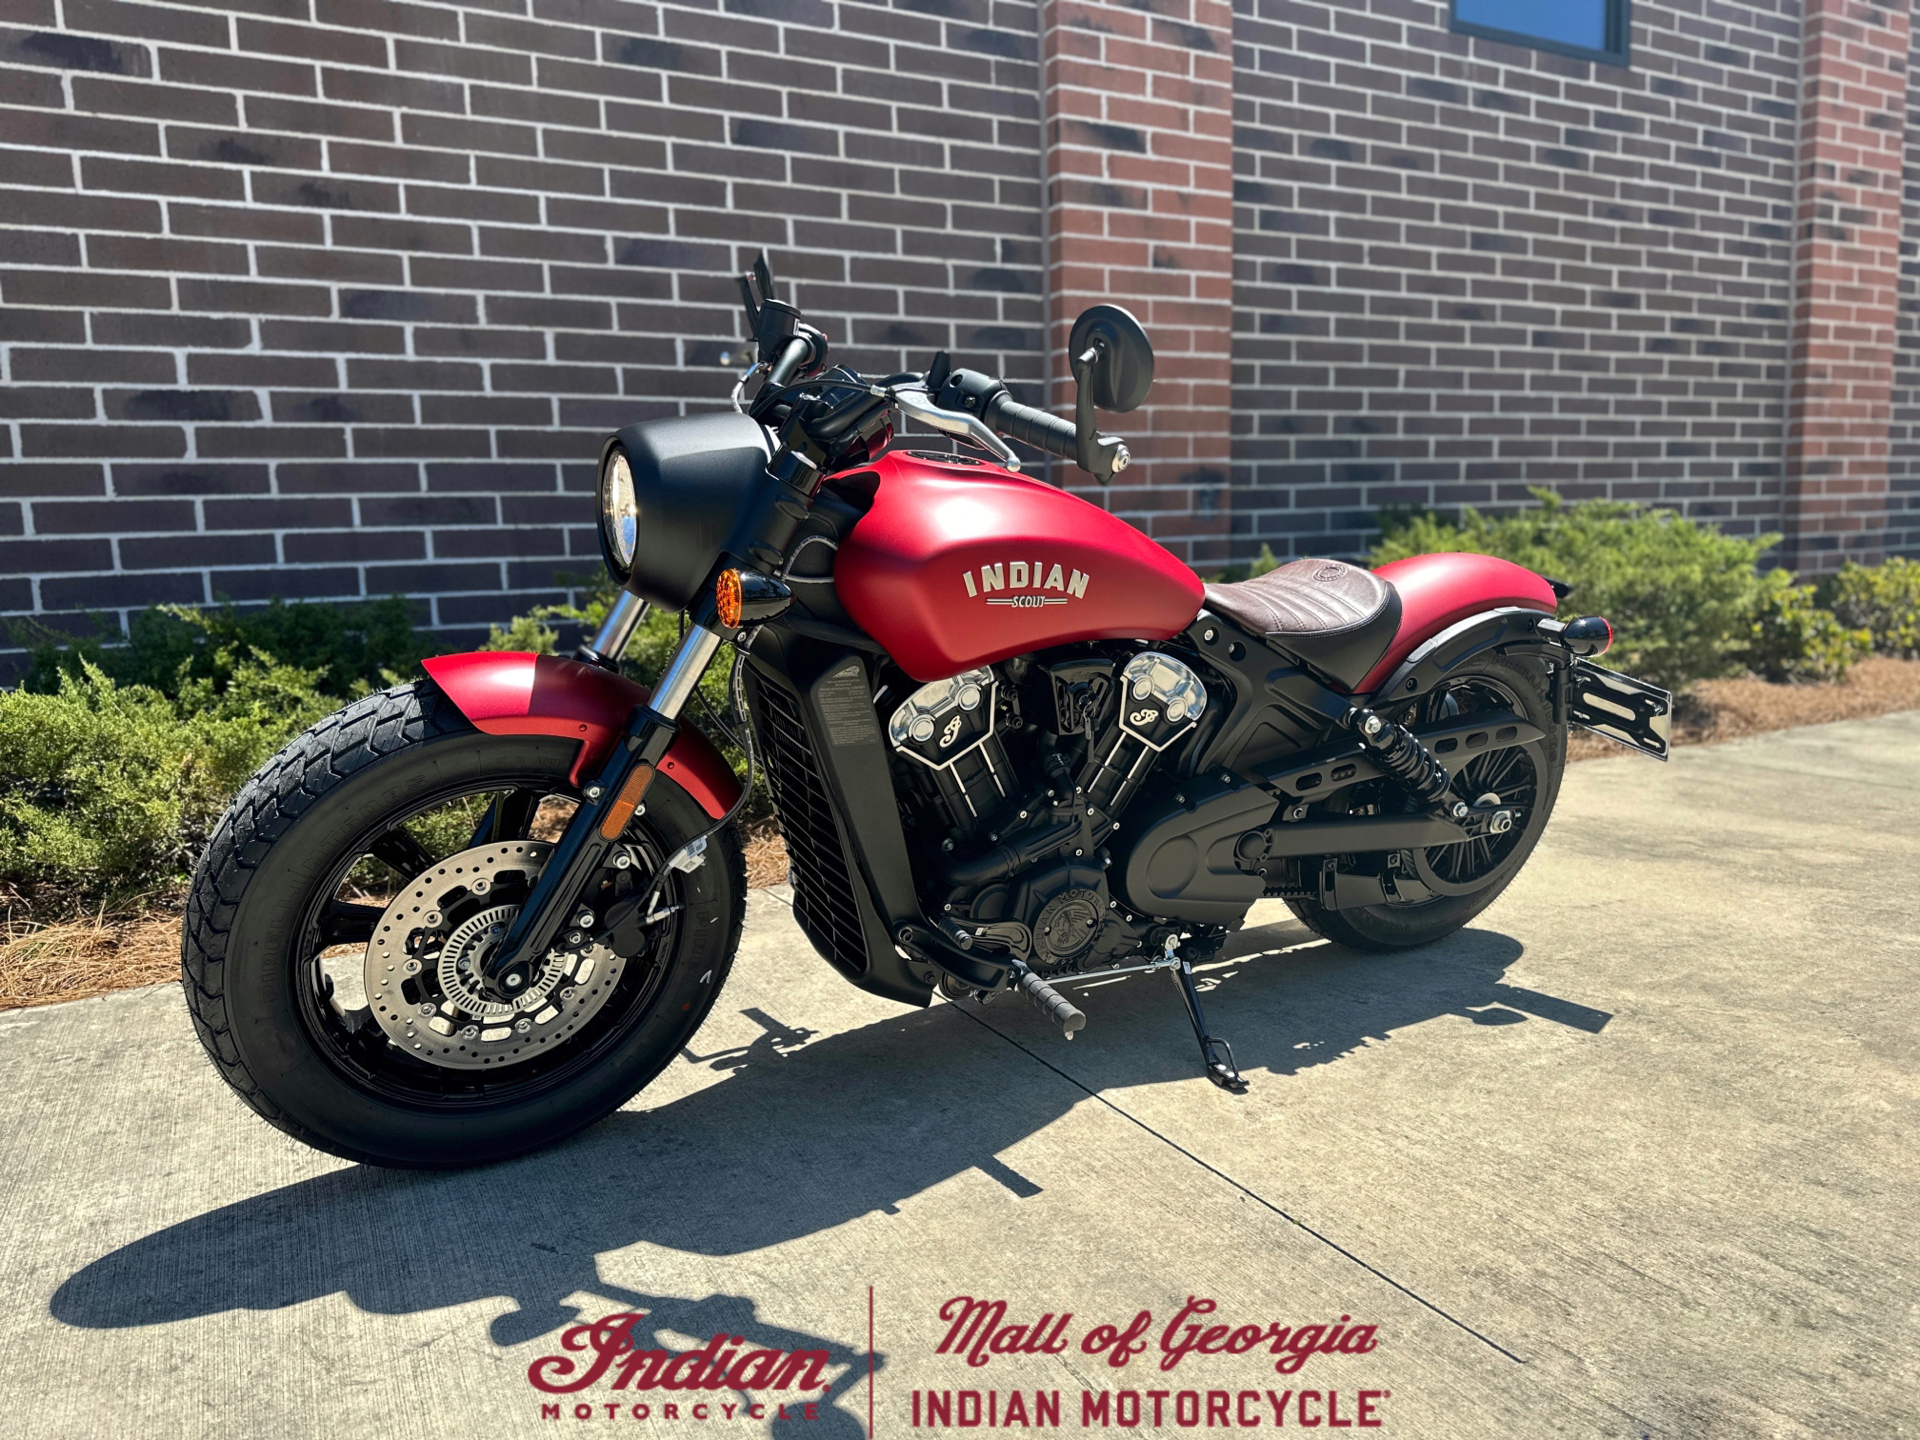 2023 Indian Motorcycle Scout® Bobber ABS in Buford, Georgia - Photo 5